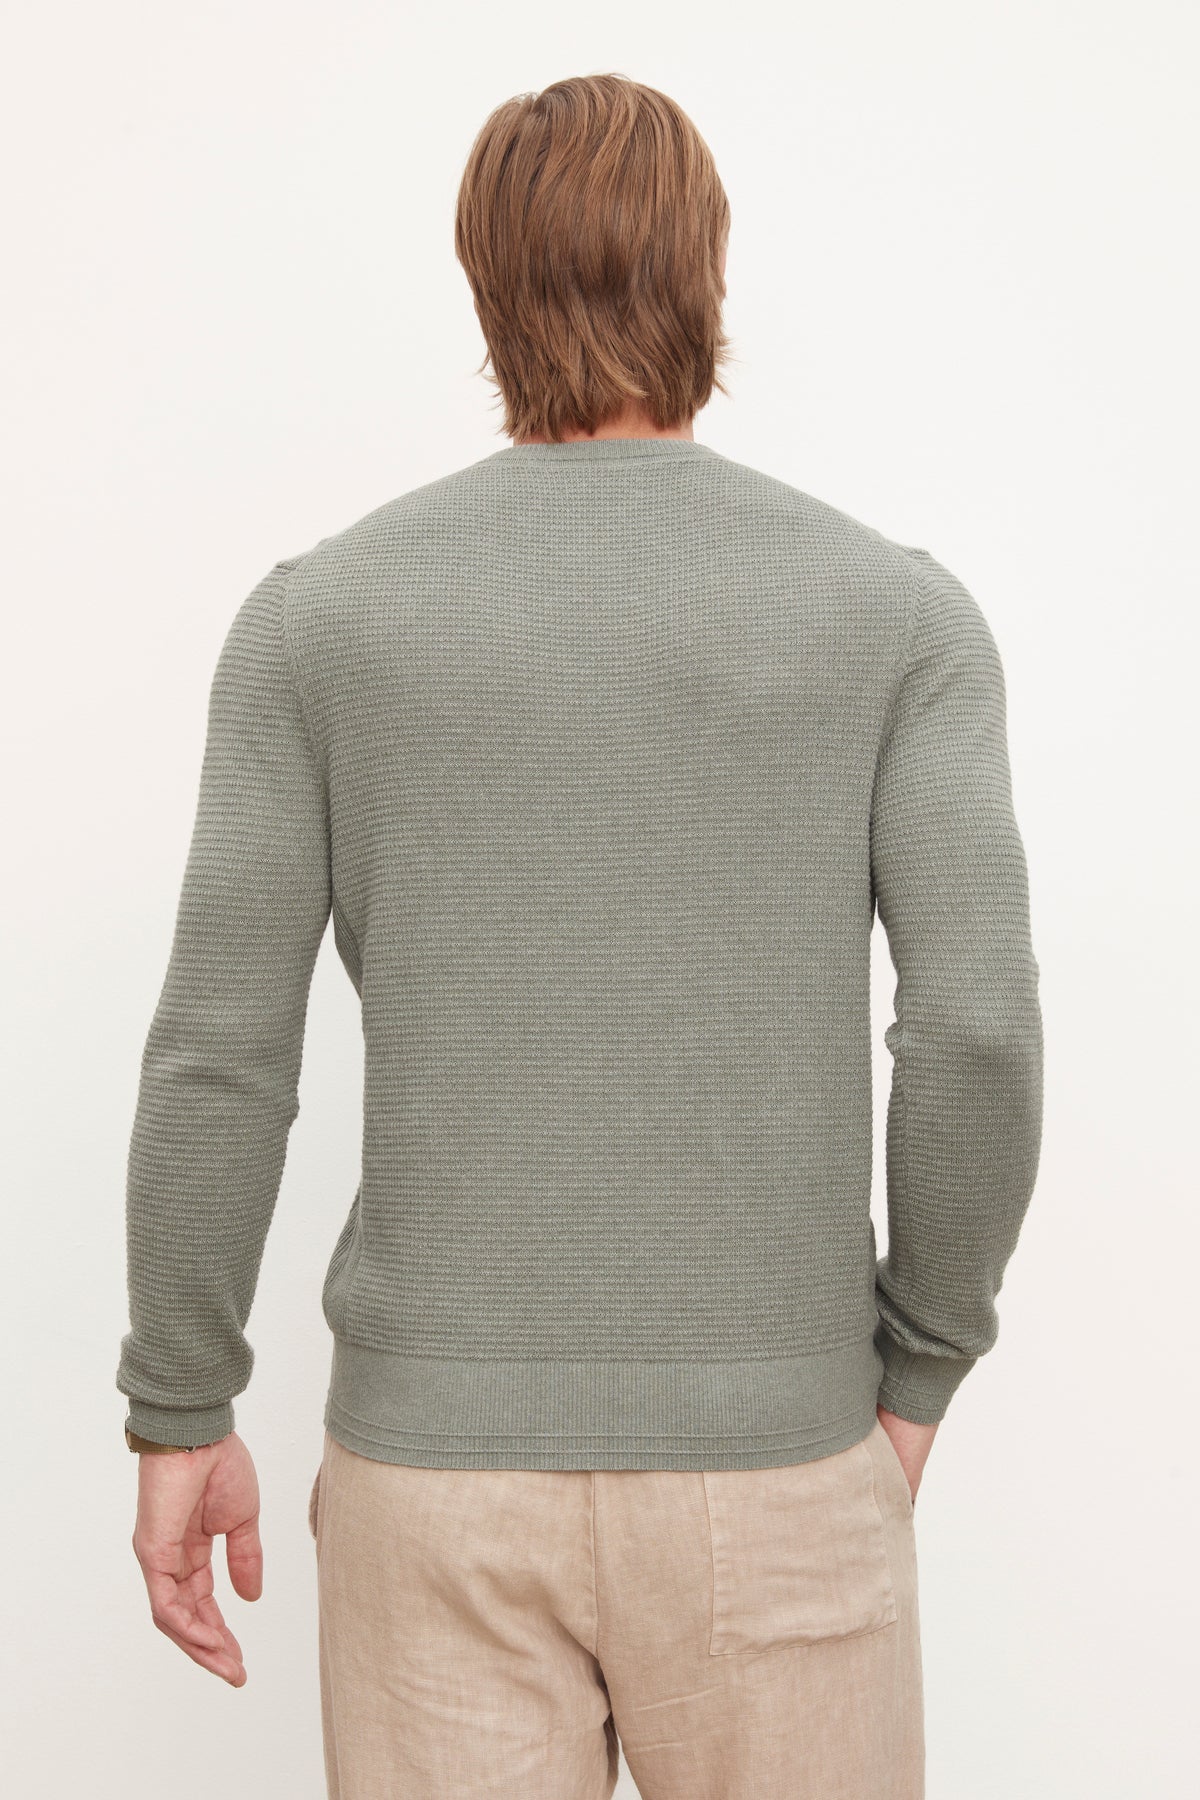 The back view of a man wearing a long-sleeve grey Velvet by Graham & Spencer ACE THERMAL CREW made of cotton with cashmere.-36008998764737